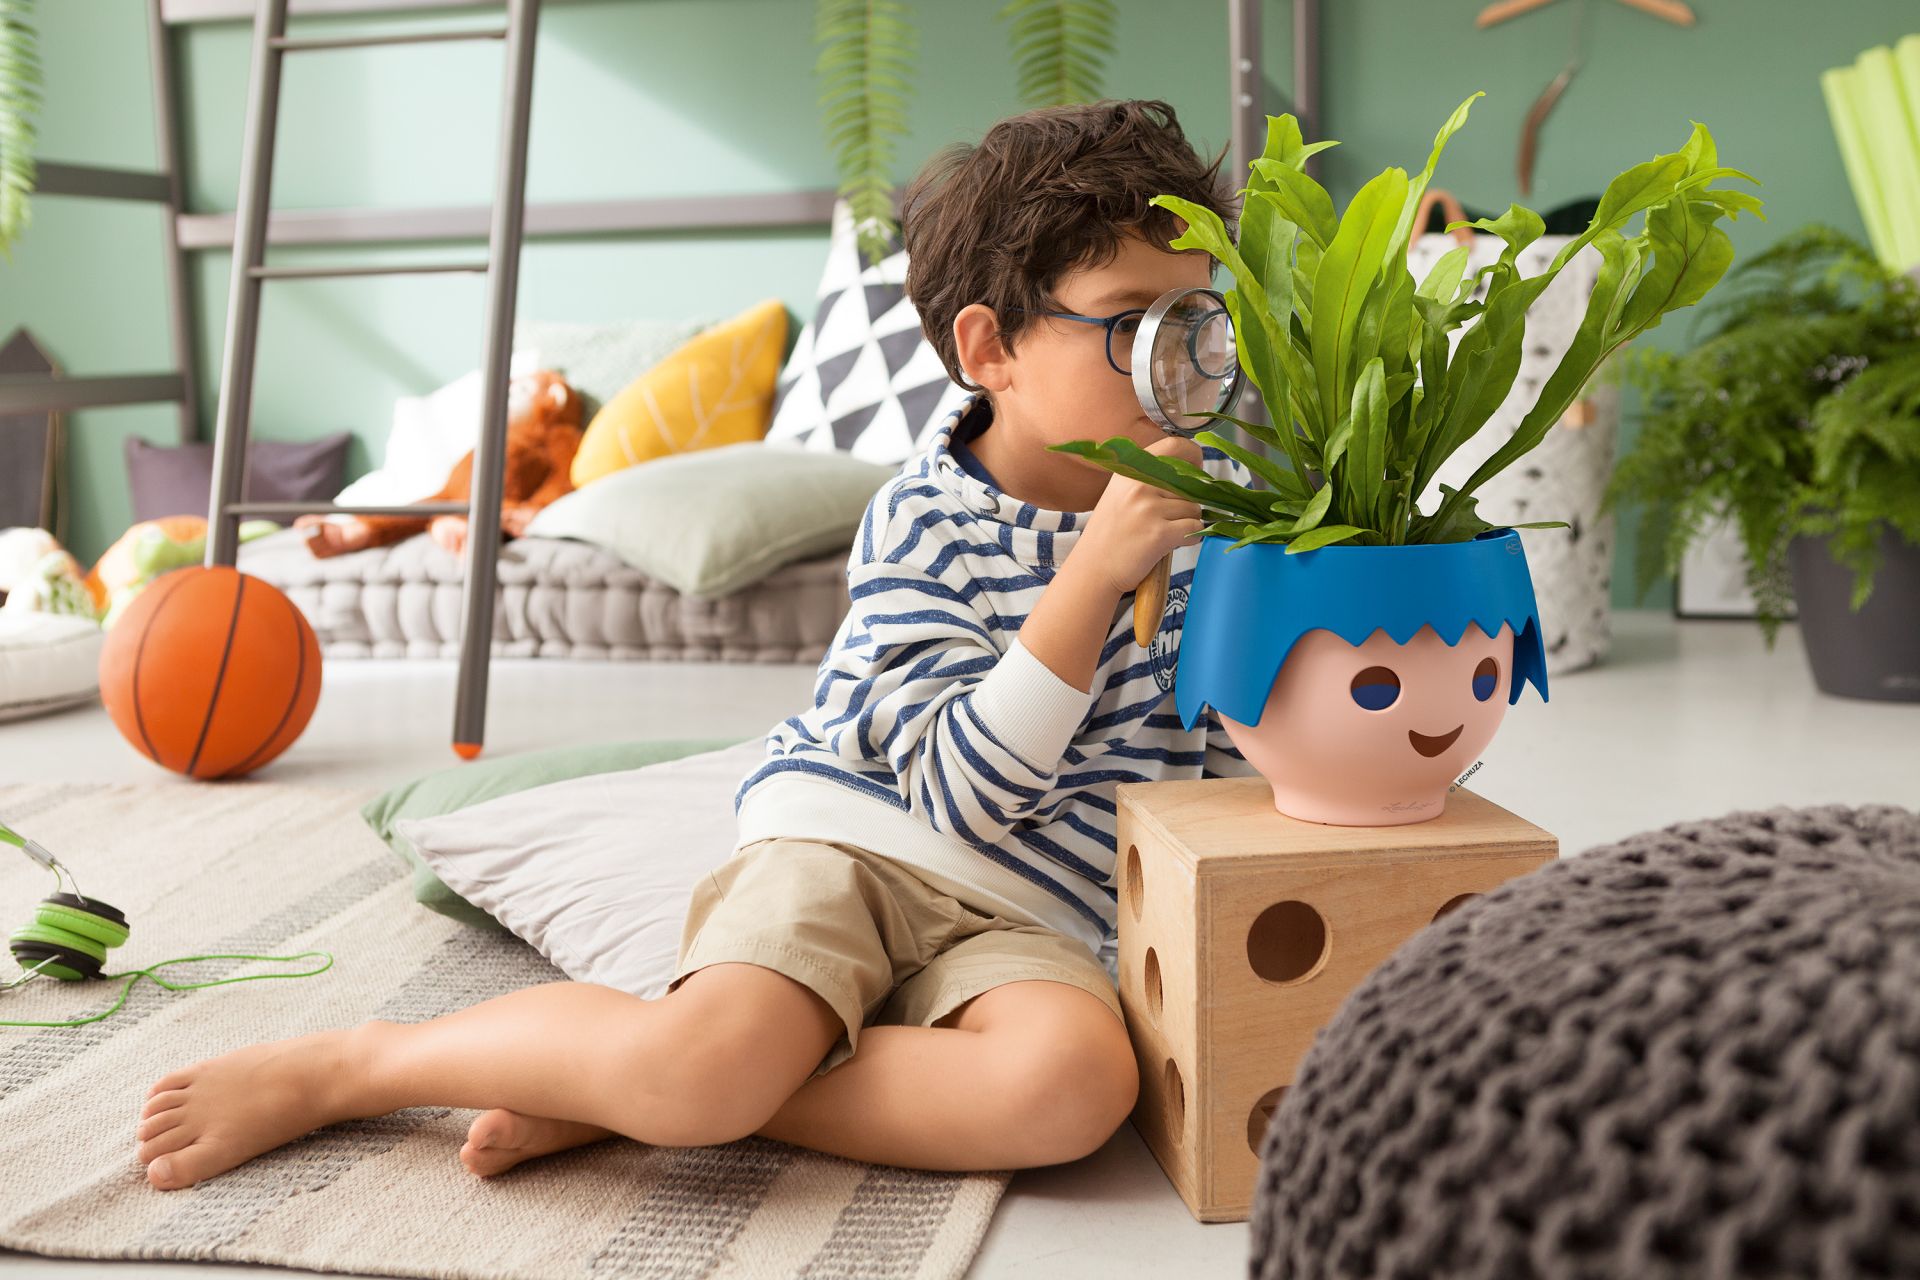 <p>                     You may have already swooned over our garden planter ideas, but there are some gorgeous kid-friendly designs available too. These ones, for example, are perfect to get kids interested in growing. With a fun design based on the well-loved PLAYMOBIL characters, they'll add a pop of color to any bedroom windowsill or patio.                   </p>                                      <p>                     What's more, the clever irrigation system will help kids to learn about watering their plants – when the water reservoir is full, the figure's eyes turn blue!                   </p>                                      <p>                     If you're a fan of indoor garden ideas then these are a fabulously playful addition.                   </p>